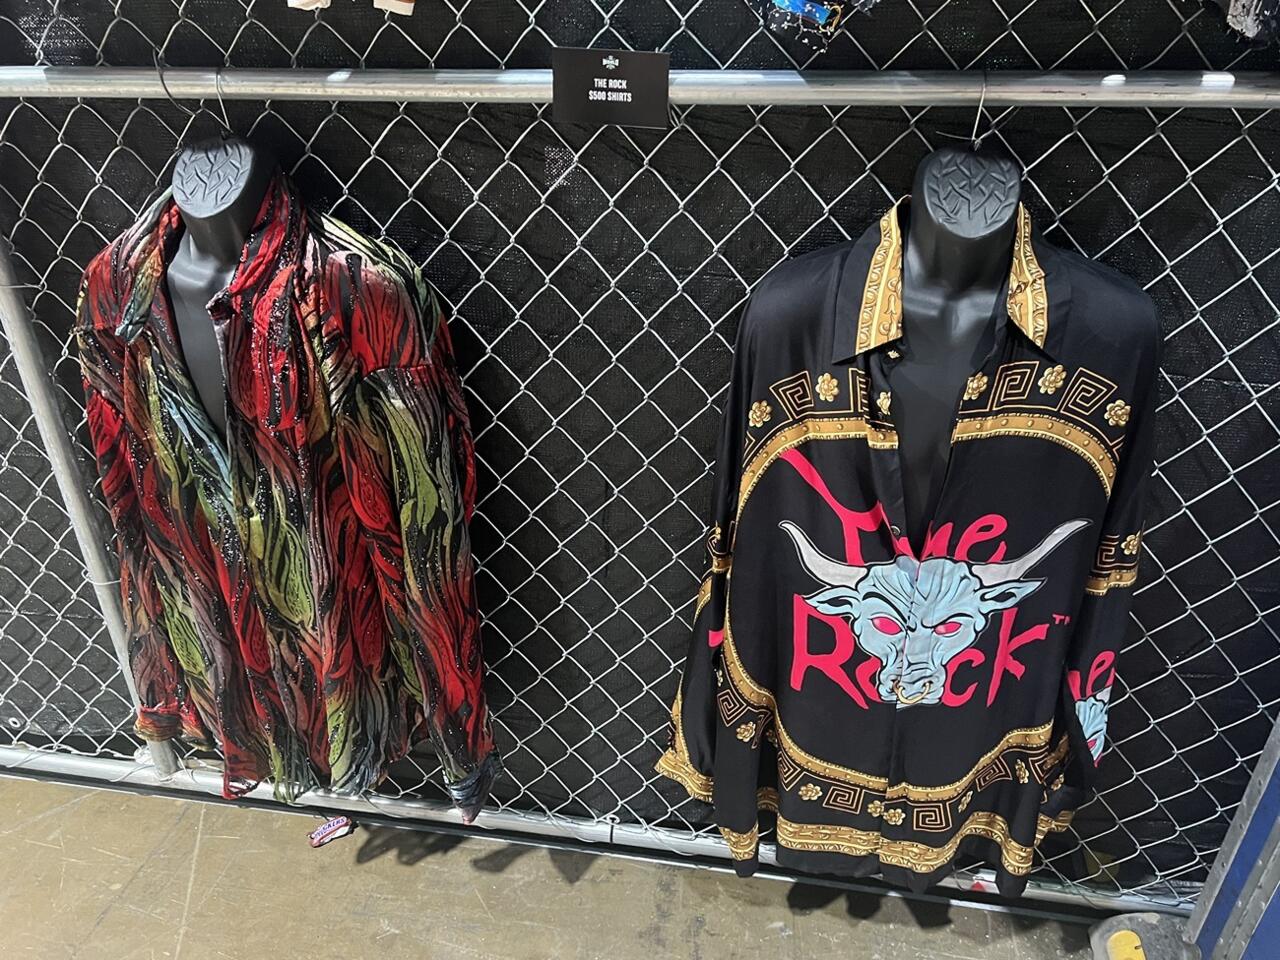 More of The Rock's $500 shirts